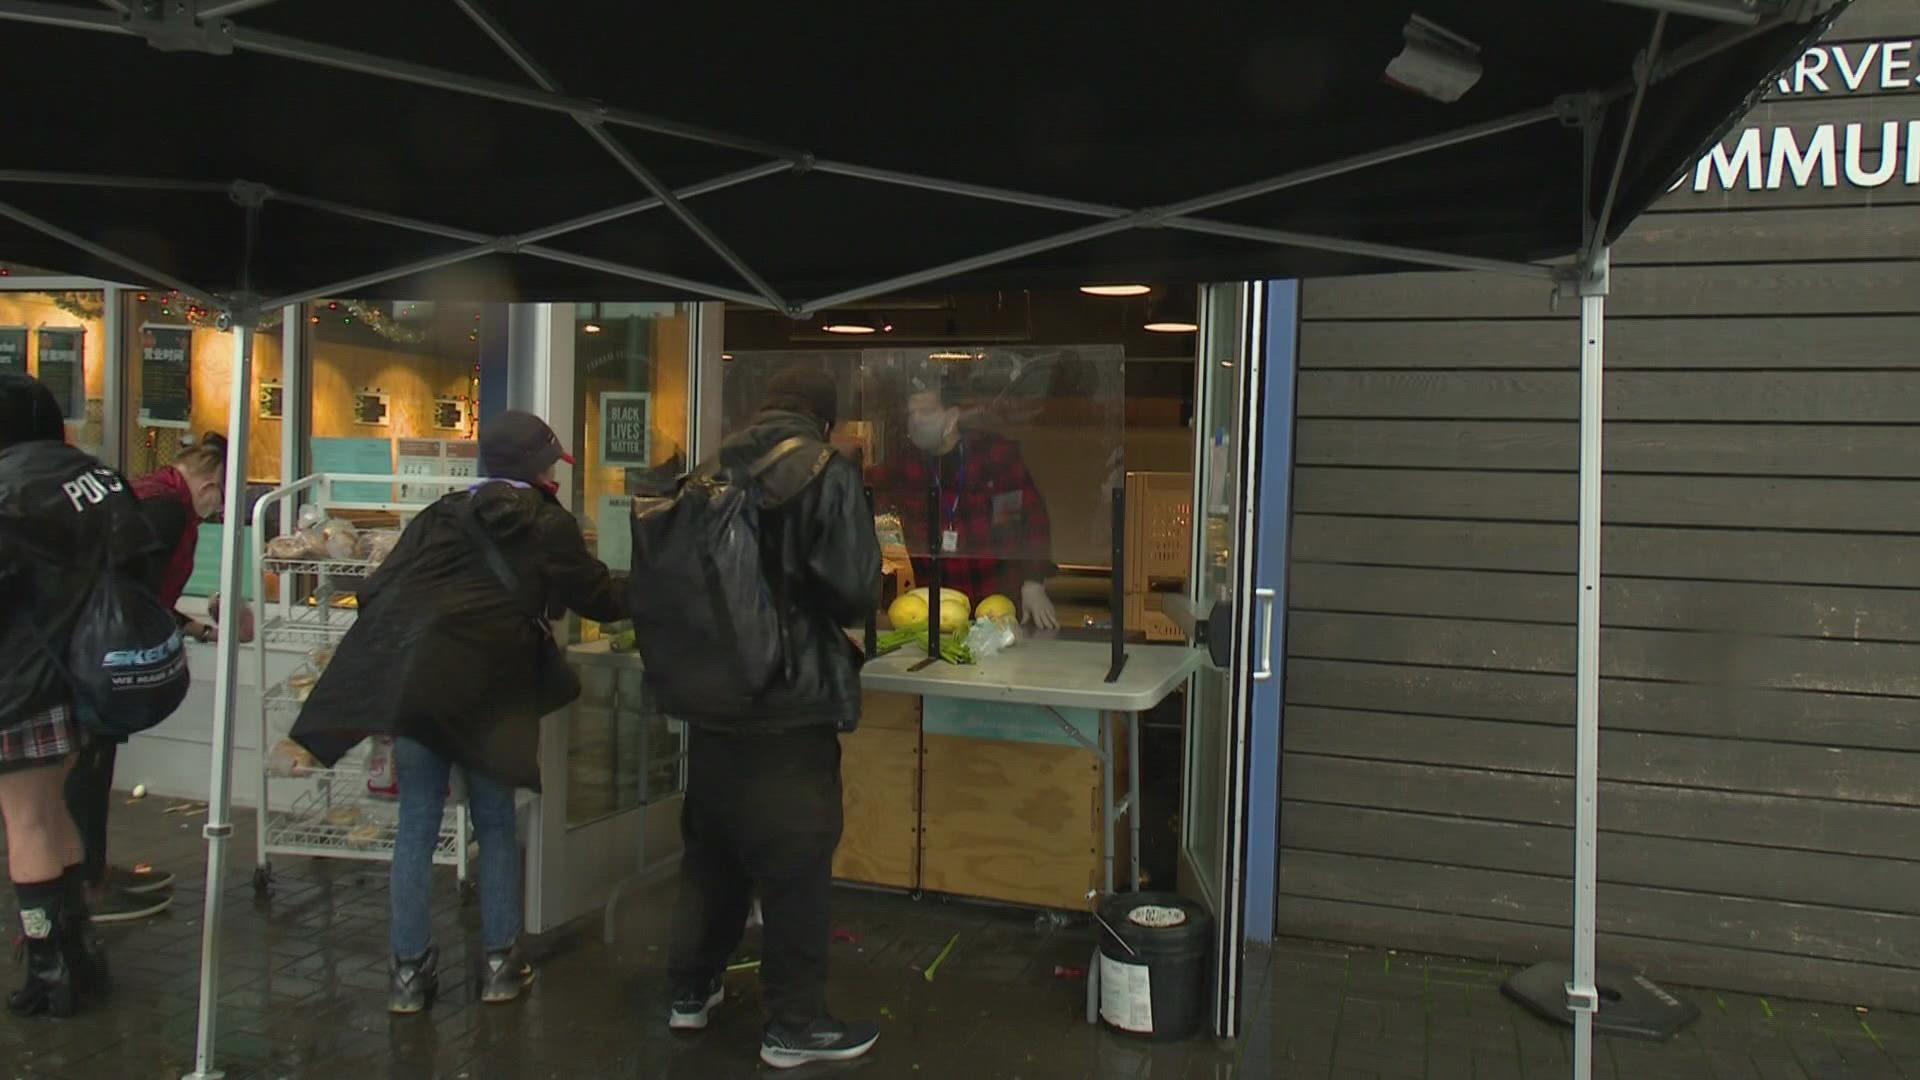 The SODO Community Market continues to serve about 1,000 people every Monday, Wednesday and Friday even with fewer helping hands.